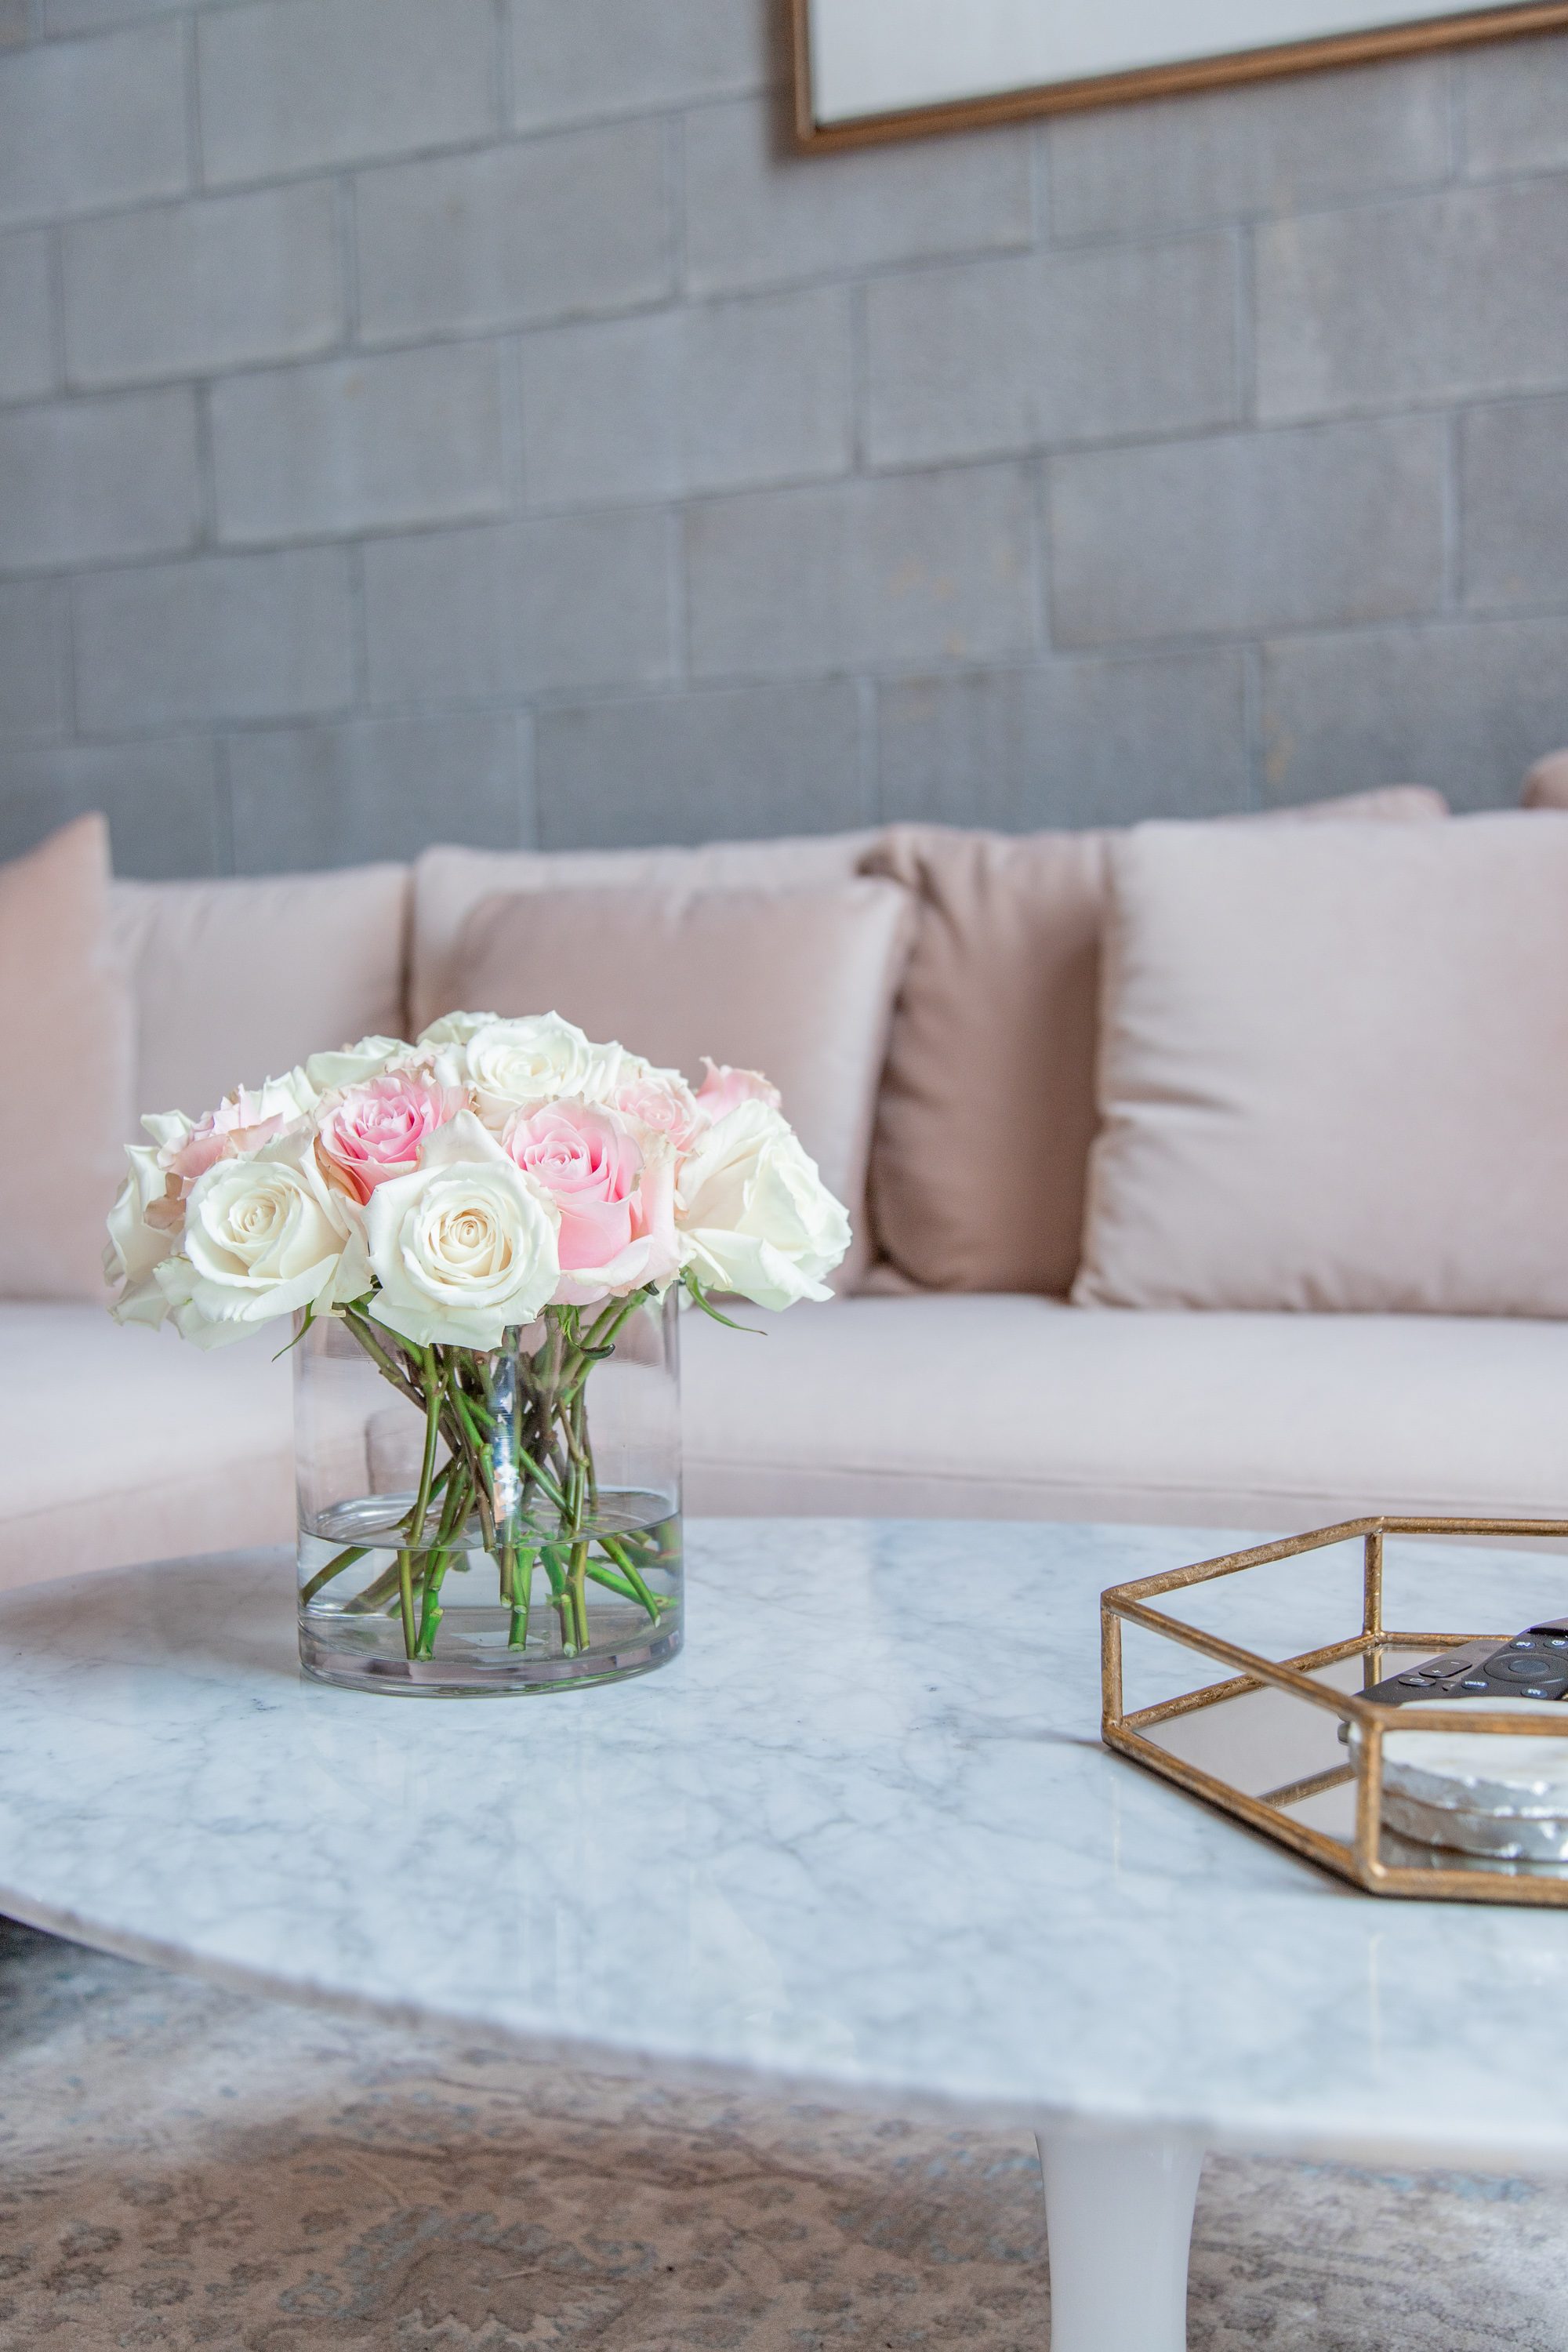 living room makeover, living room reveal, blush pink couch, rove concepts hugo sectional pink, rove concepts luca chairs white, rove concepts marble coffee table, rove concepts petal side table, rove concepts coupon code, rove concepts reviews, feminine living room style, living room before and after